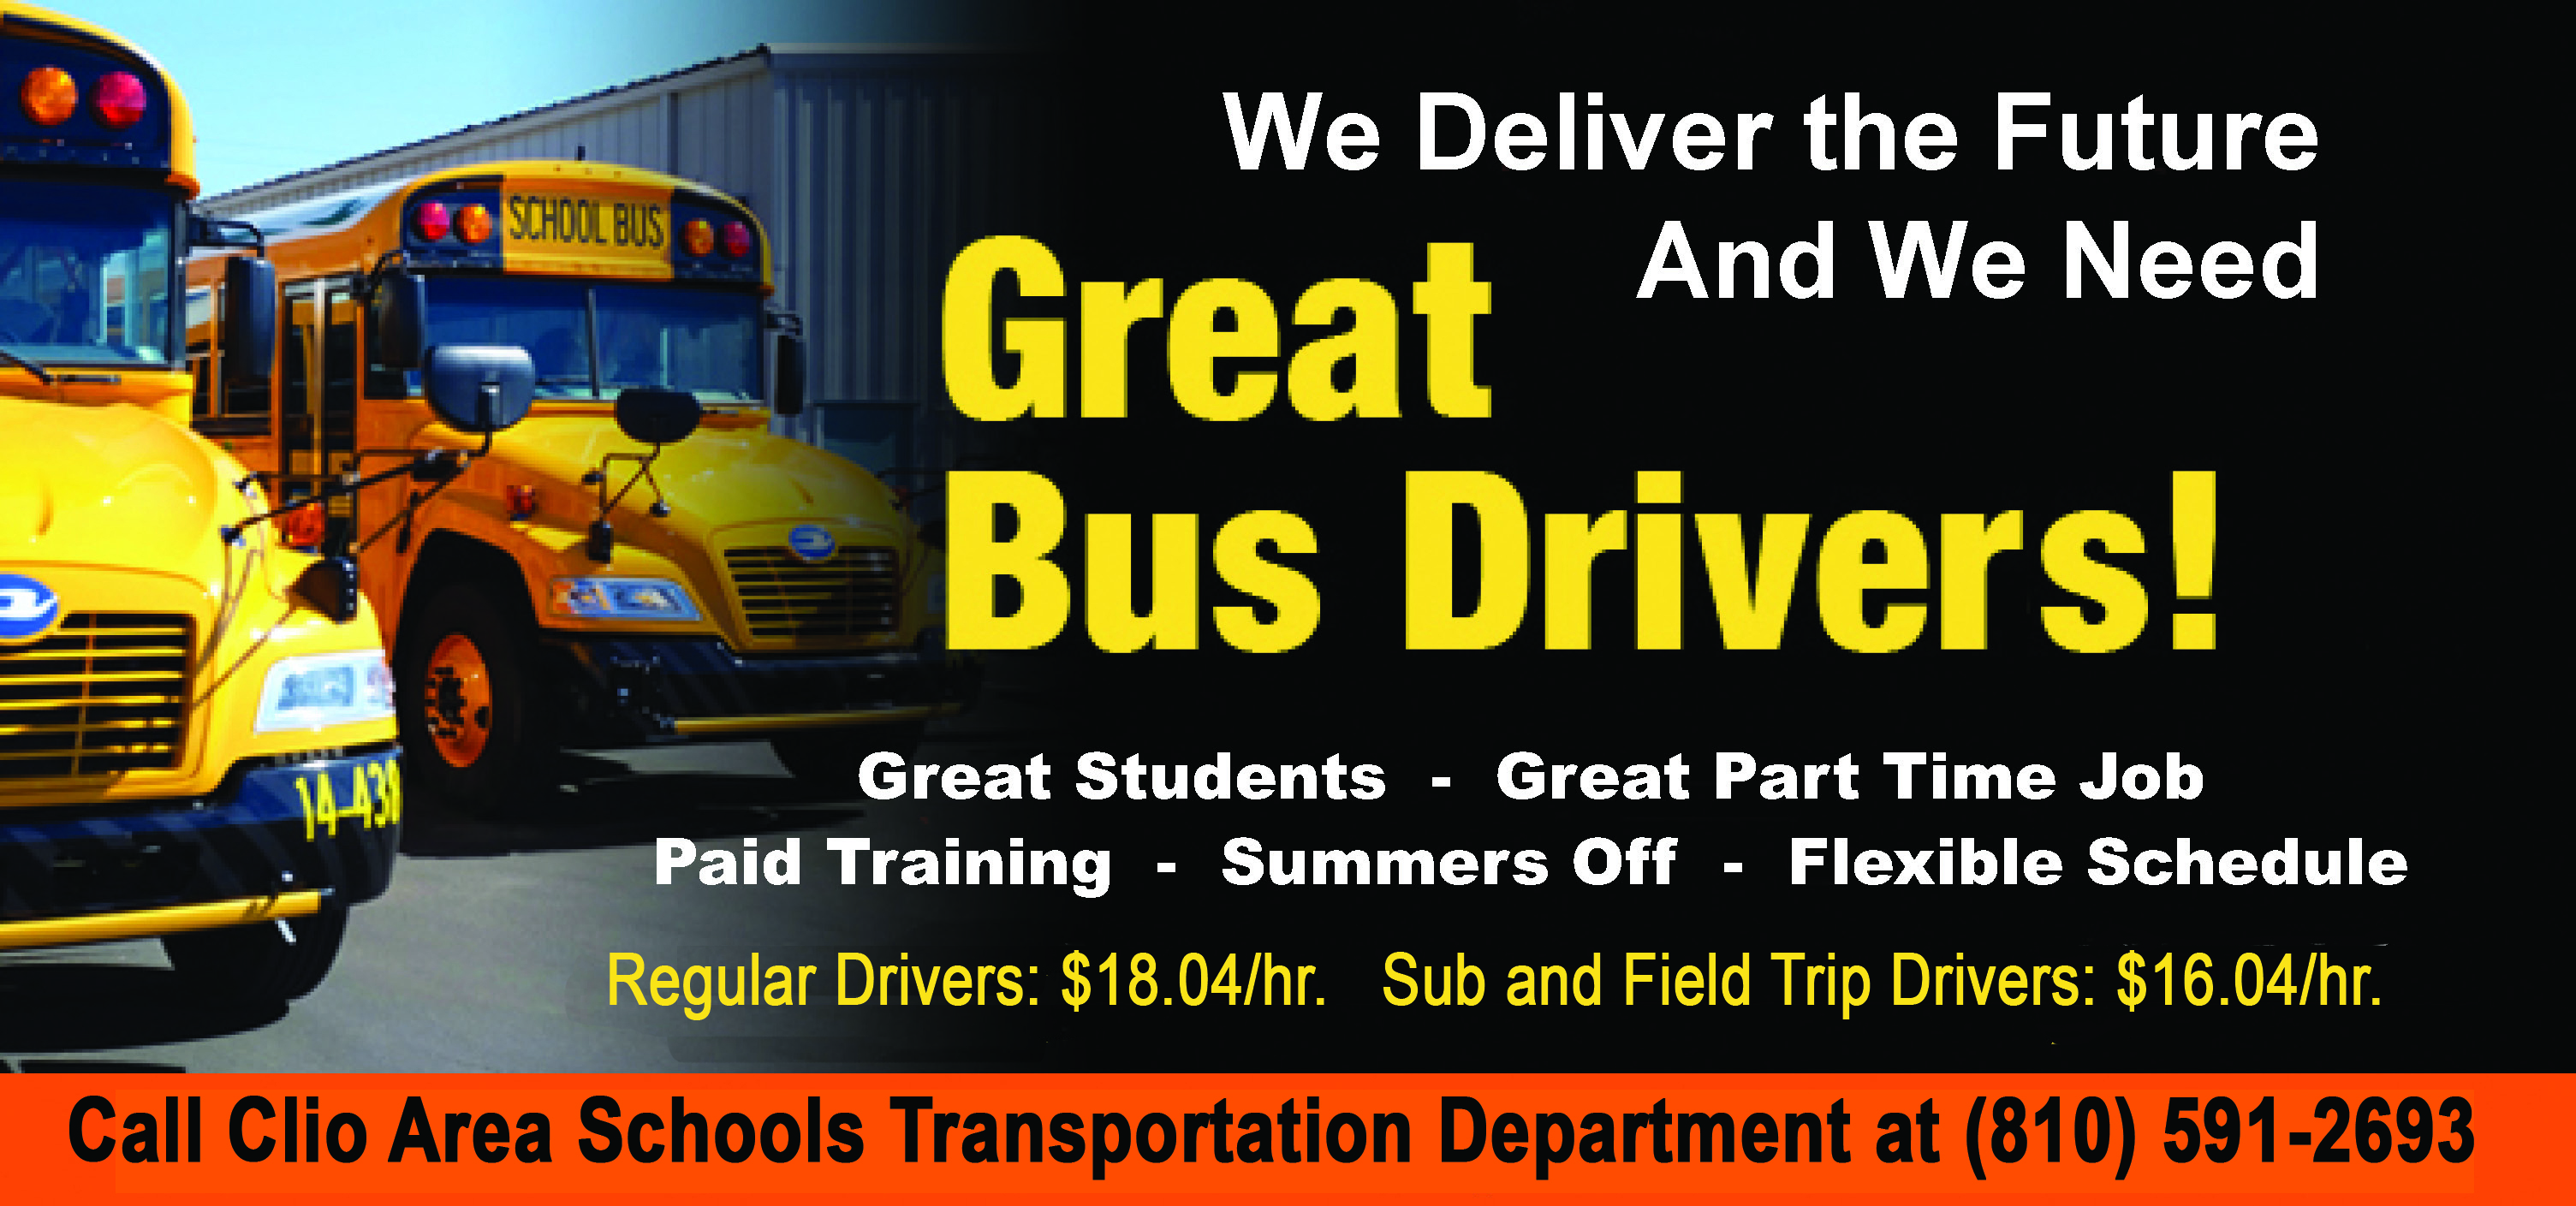 Ad soliciting bus drivers